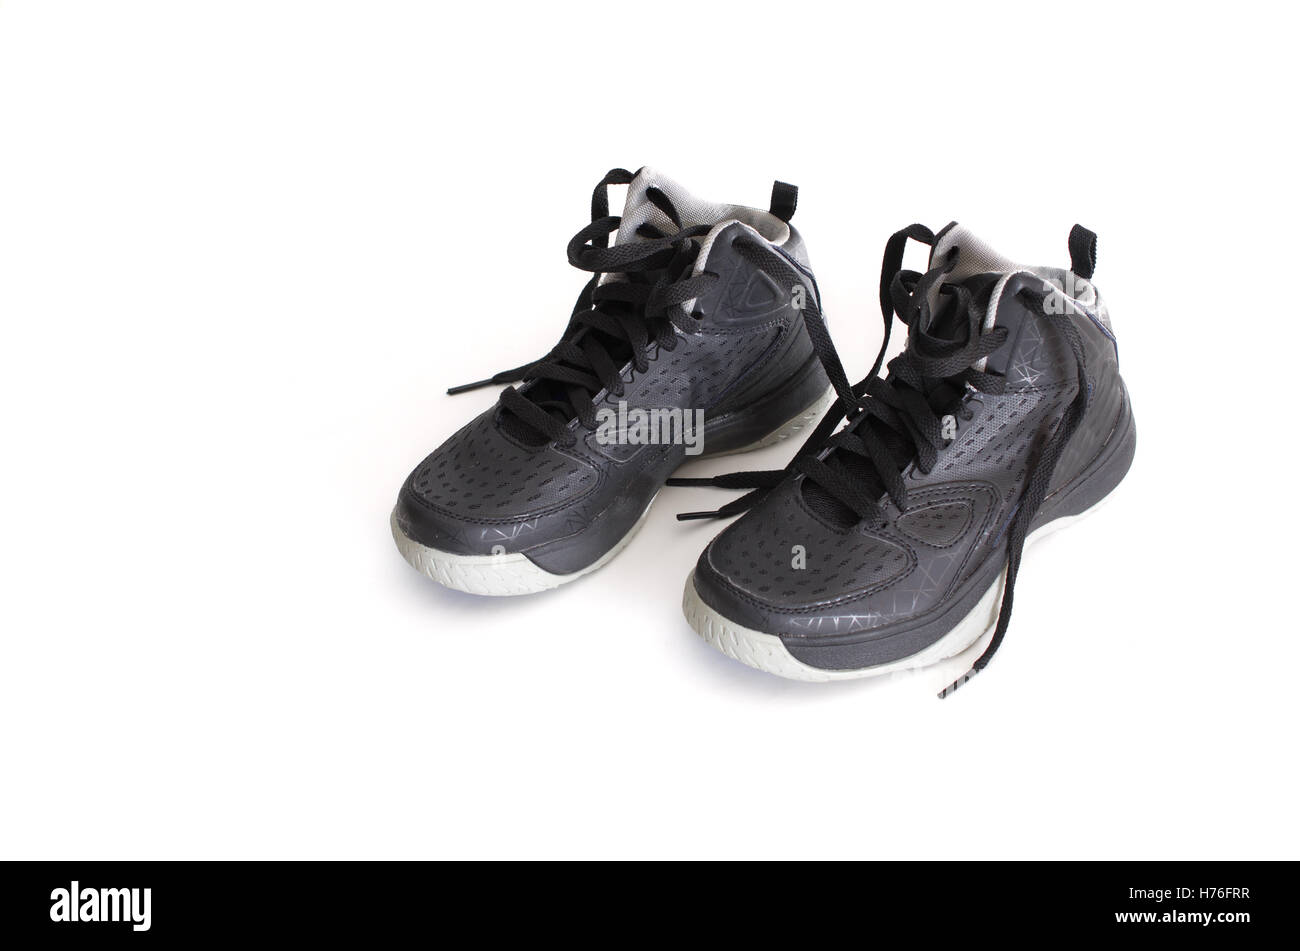 Children's modern high-top noir cuir et maille chaussures de basket-ball, sneakers isolated on white Banque D'Images